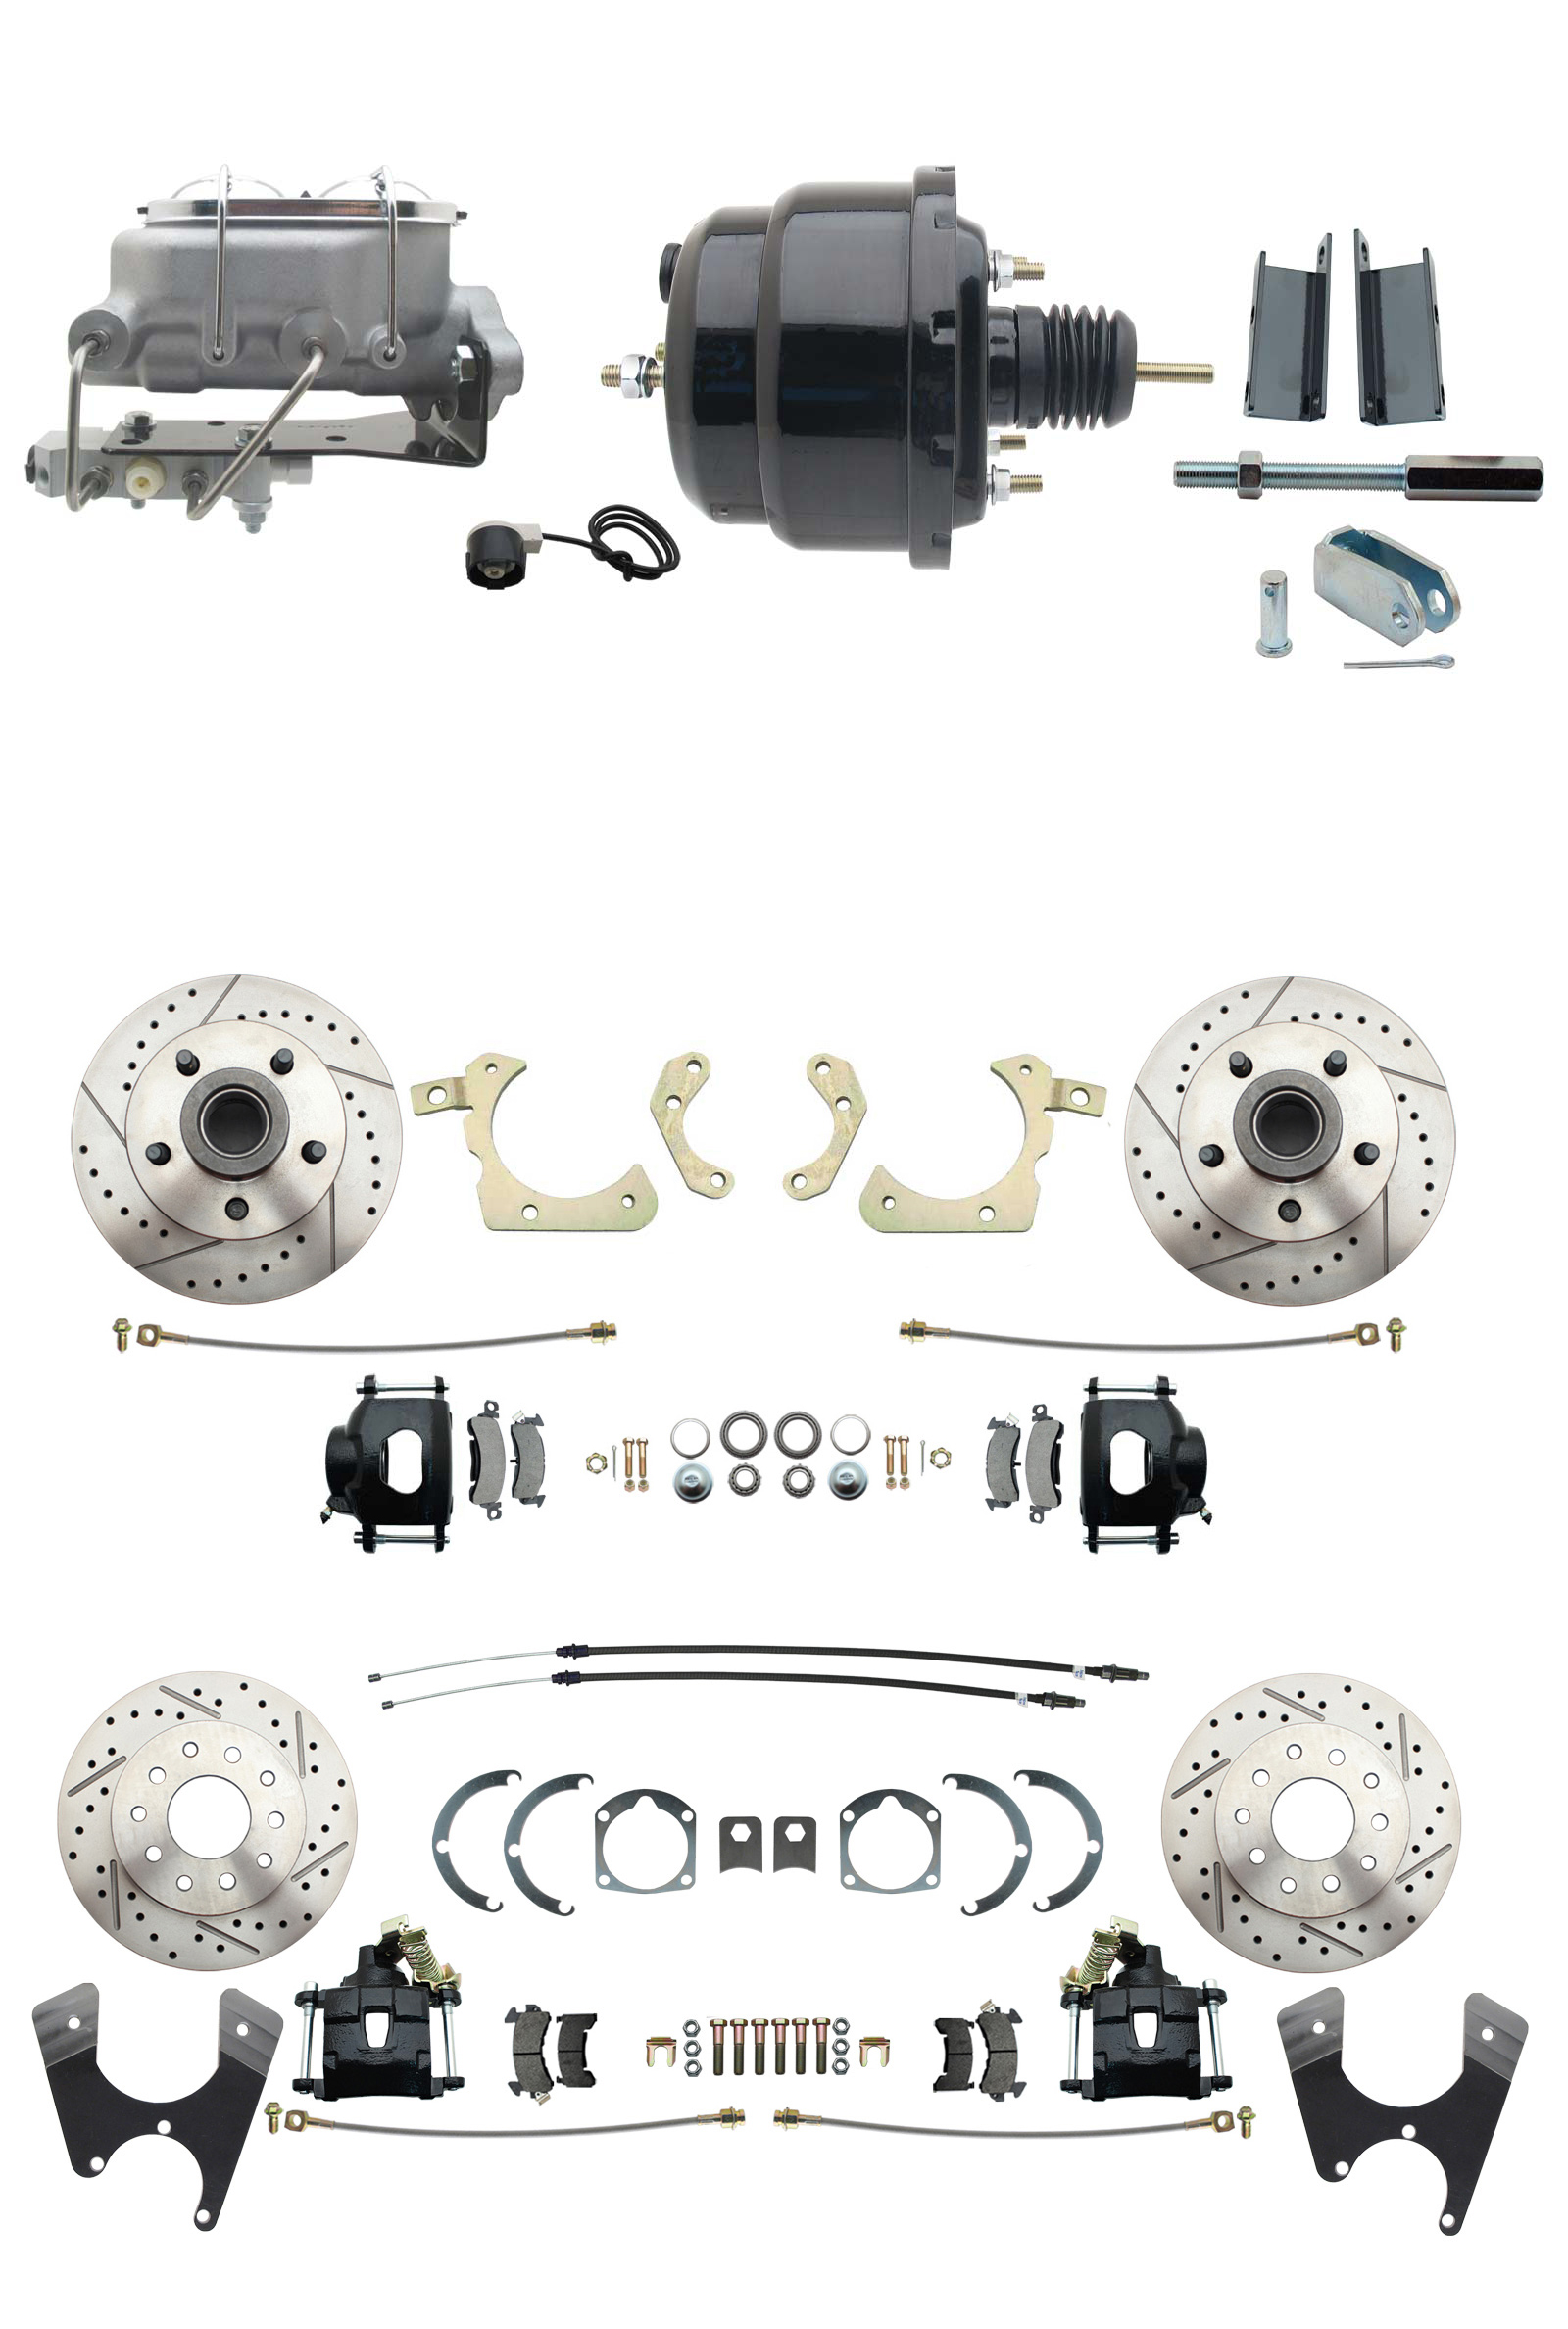 1955-1958 GM Full Size Front & Rear Power Disc Brake Kit Black Powder Coated Calipers Drilled/Slotted Rotors (Impala, Bel Air, Biscayne) & 8 Dual Powder Coated Black Booster Conversion Kit W/ Aluminum Master Cylinder Bo